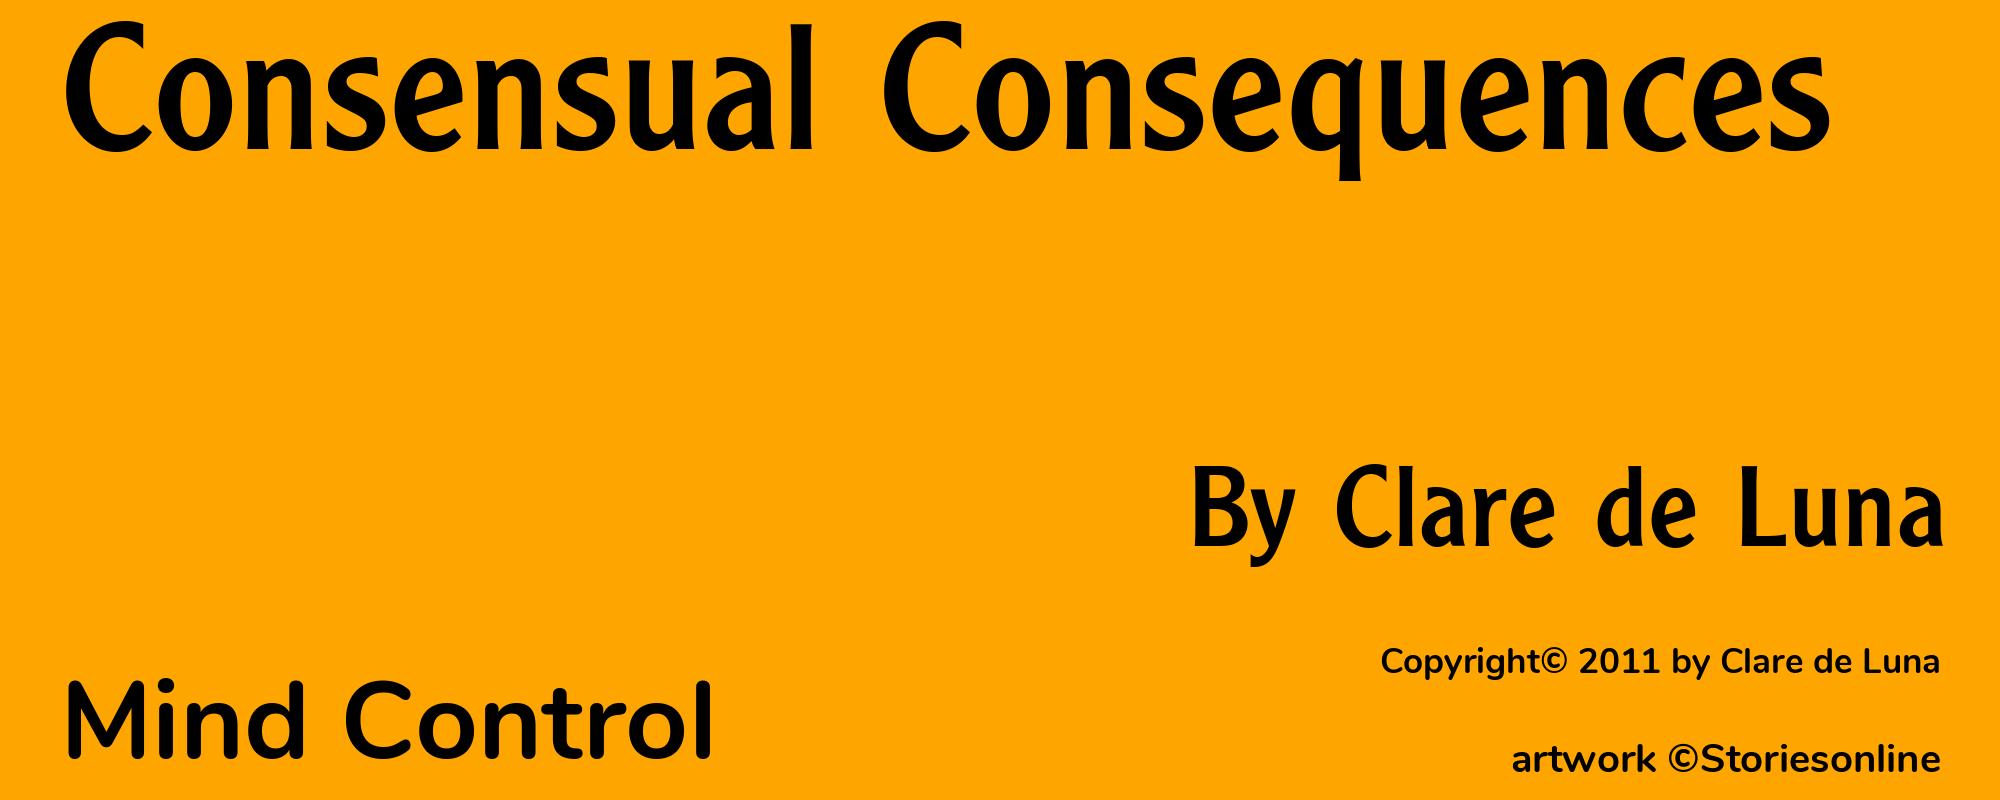 Consensual Consequences - Cover